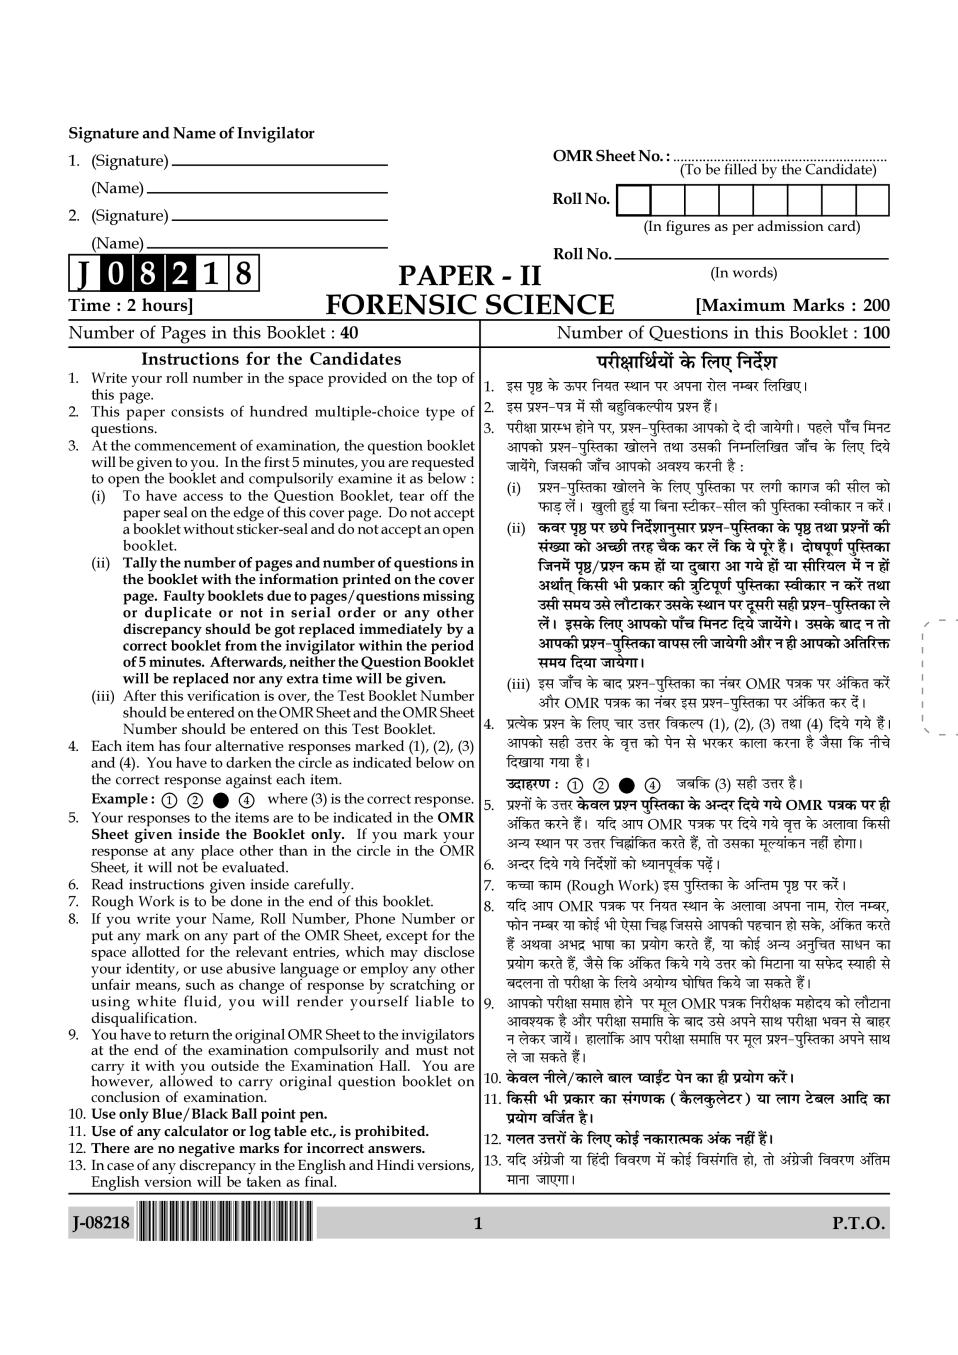 UGC NET Forensic Science Question Paper 2018 - Page 1